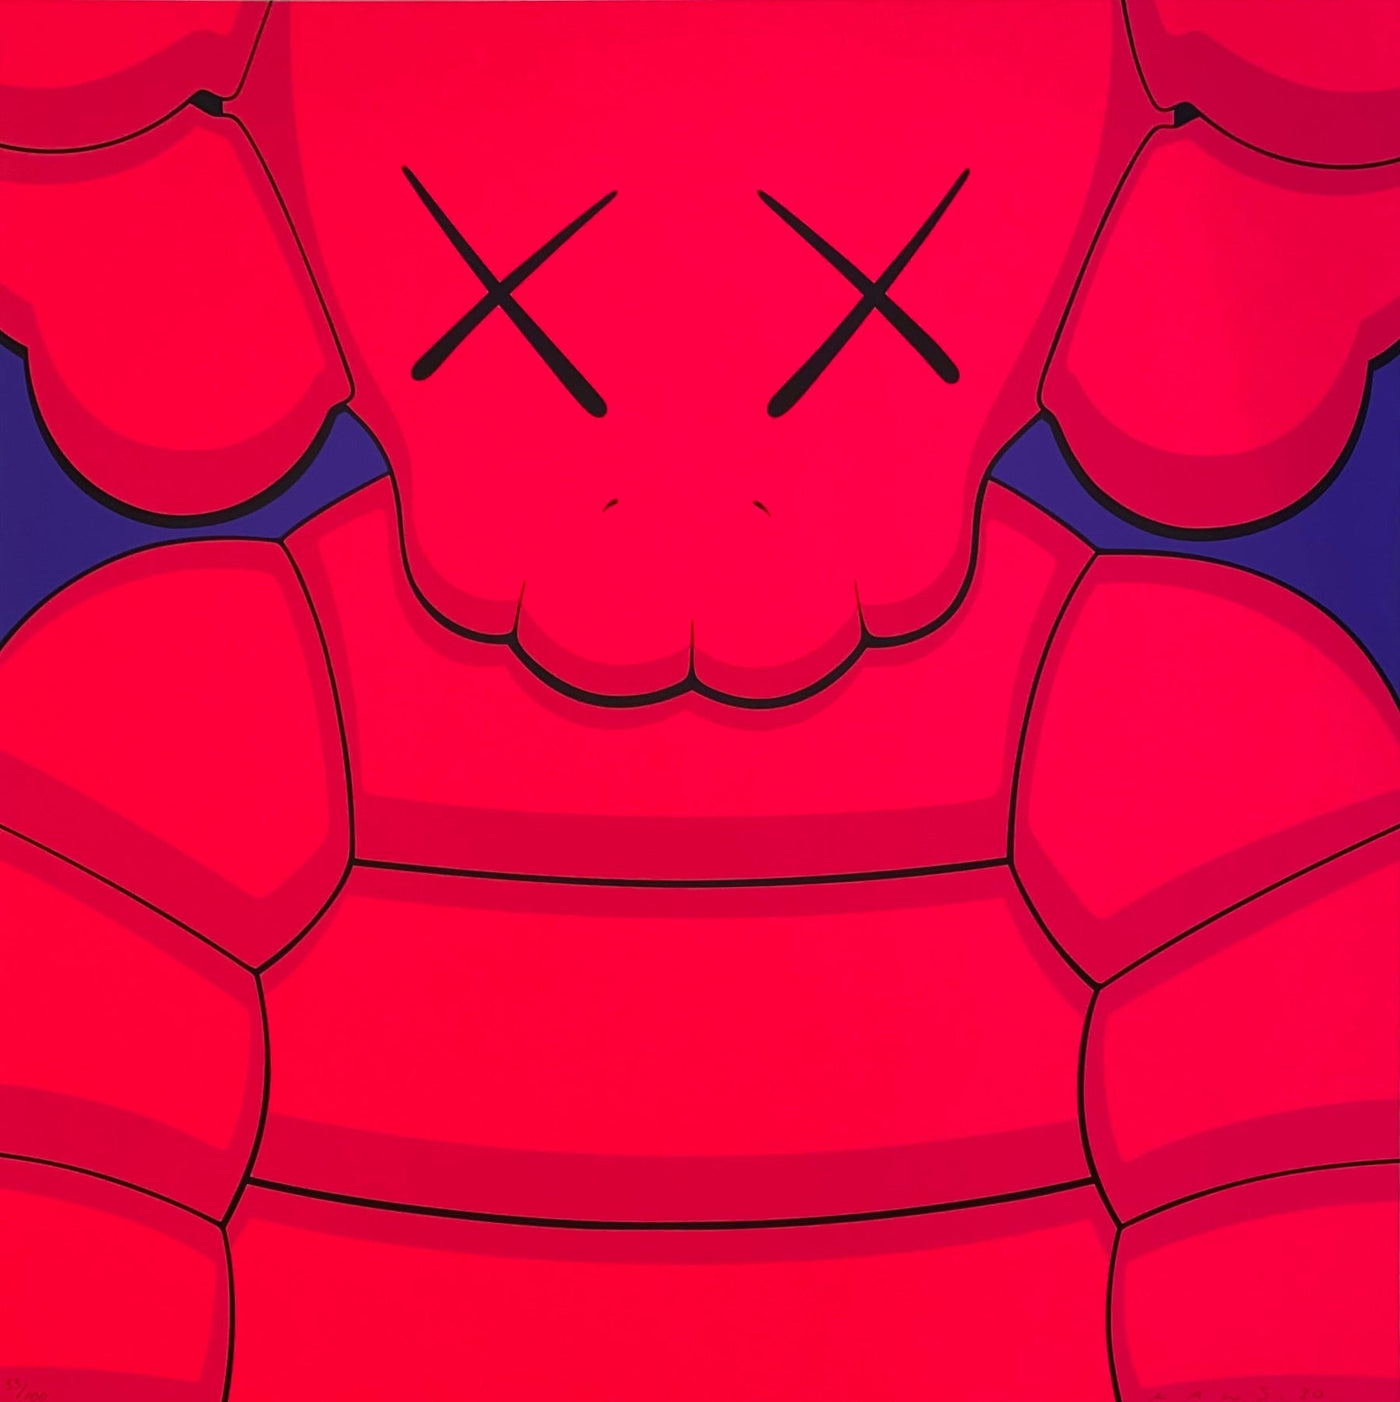 KAWS What Party 2020